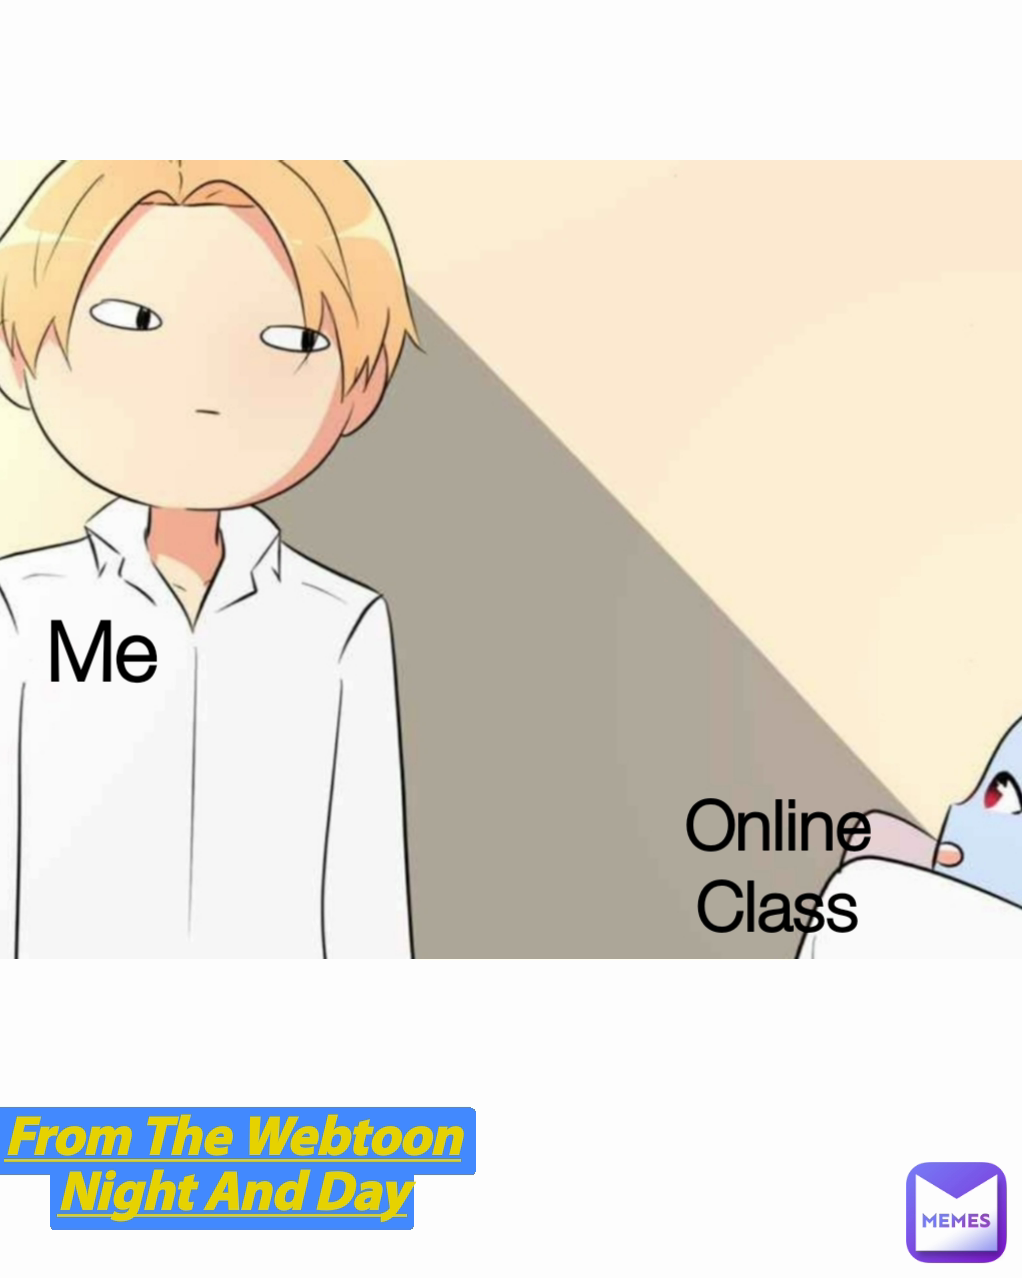 Online Class Type Text Me From The Webtoon
Night And Day